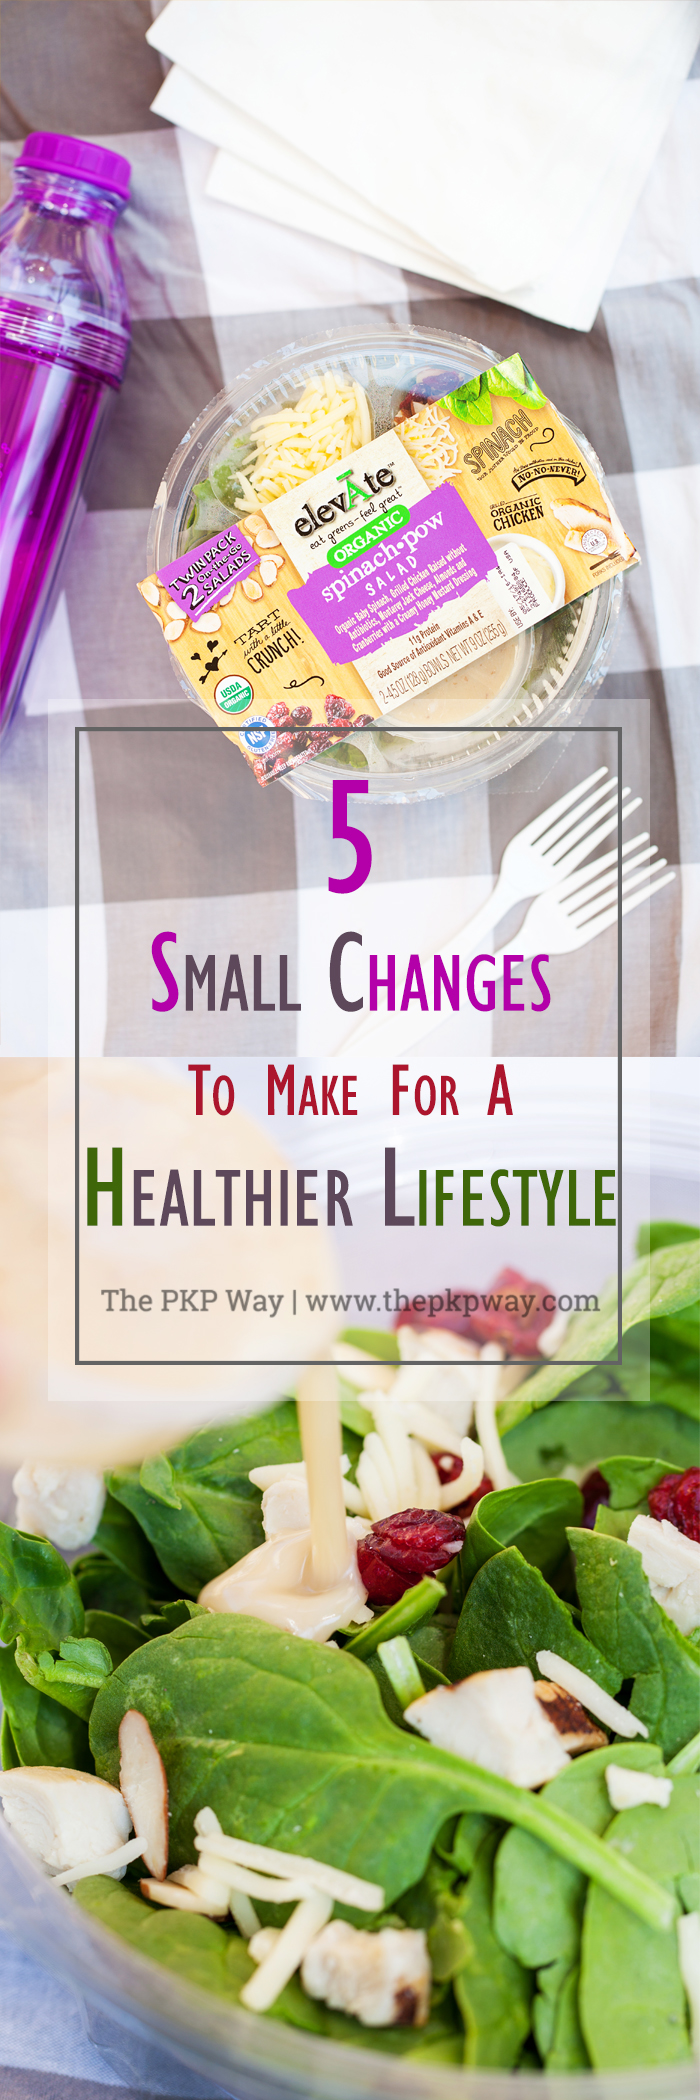 A healthier life doesn’t have to be hard. You’re on your way with these 5 Small Changes to make for a Healthier Lifestyle.